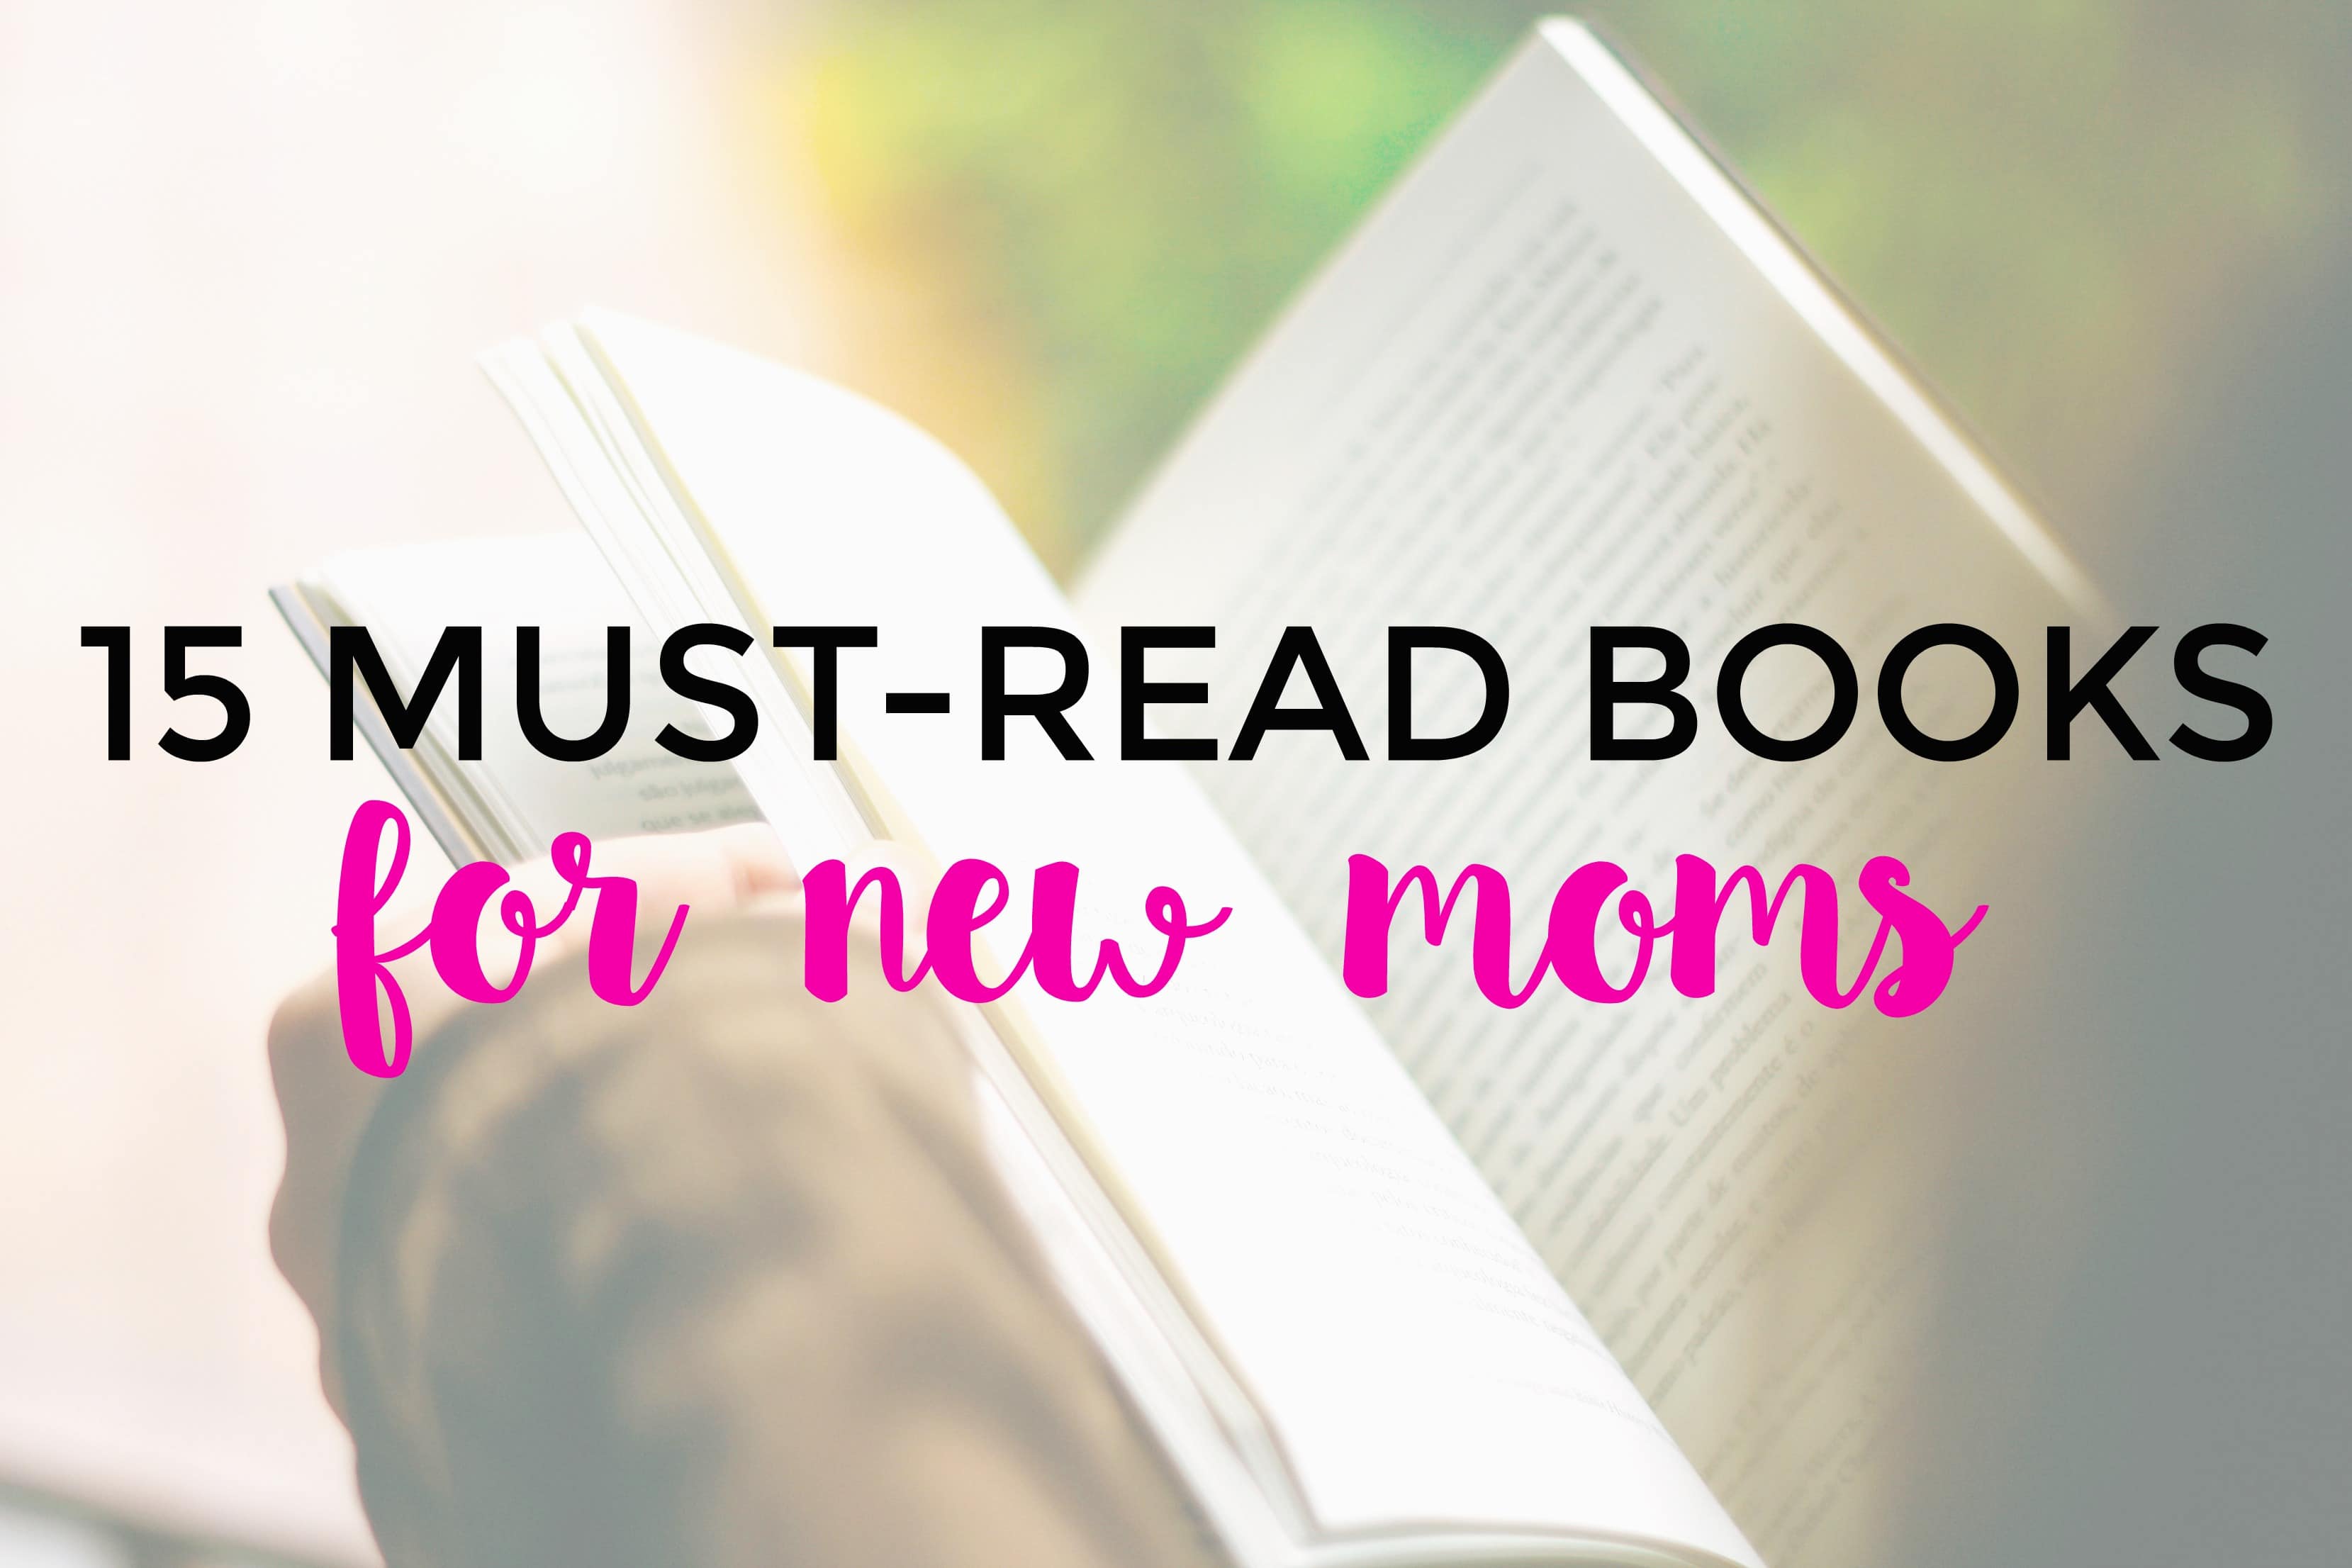 Soon to become a mother? These books for new moms are just what you need to get educated.